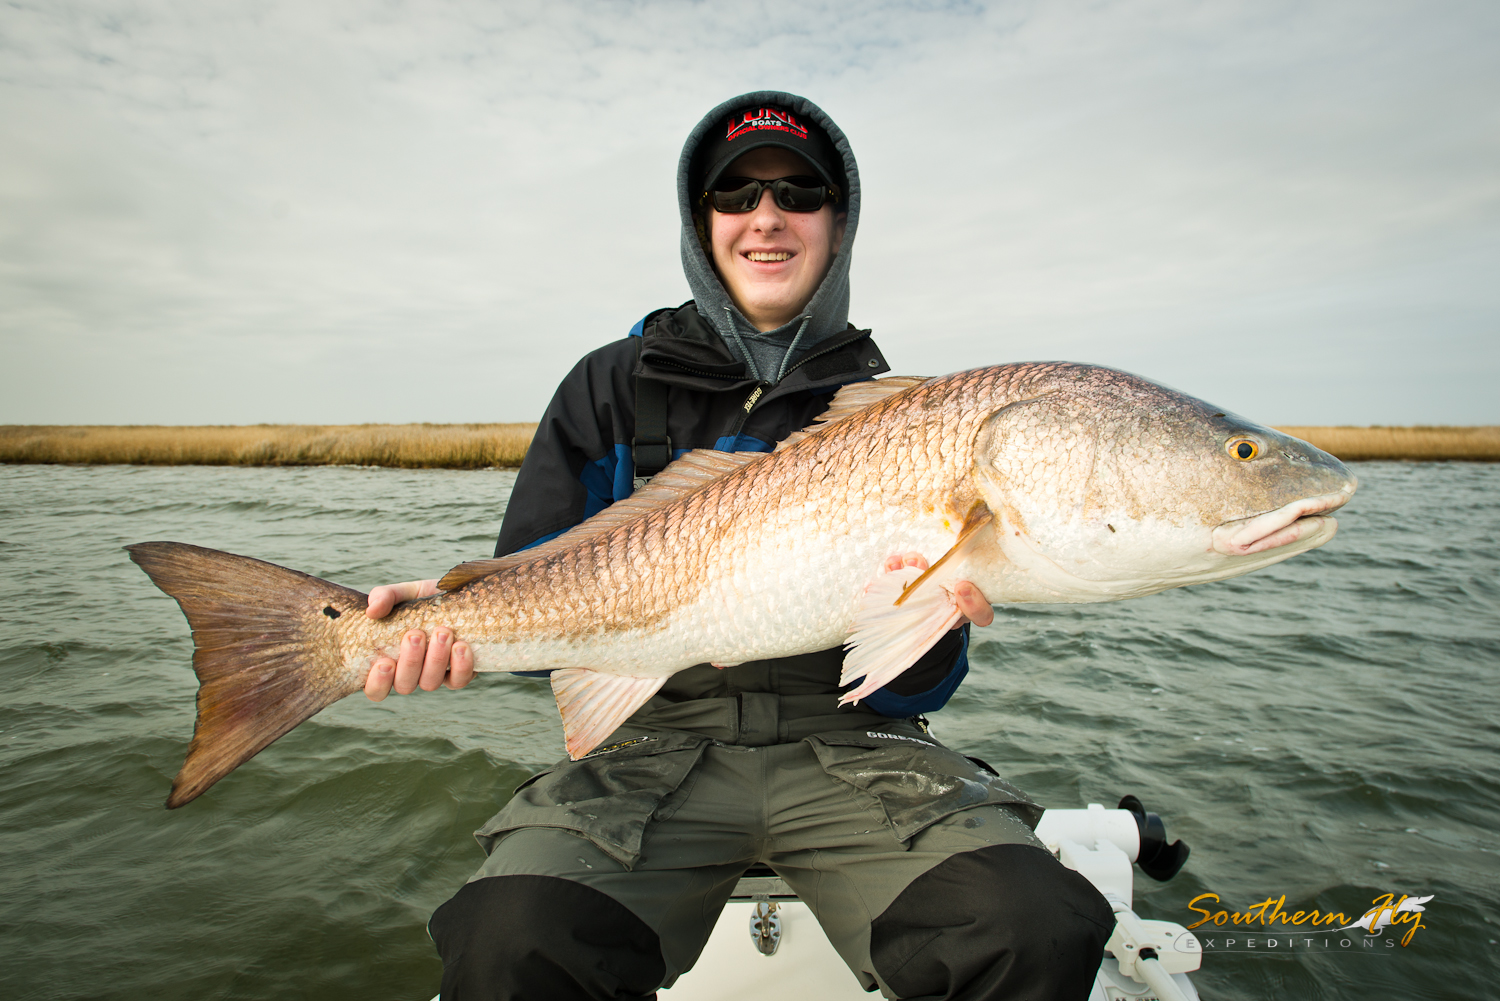 Redfish guides new orleans louisiana iwth southern fly expeditions